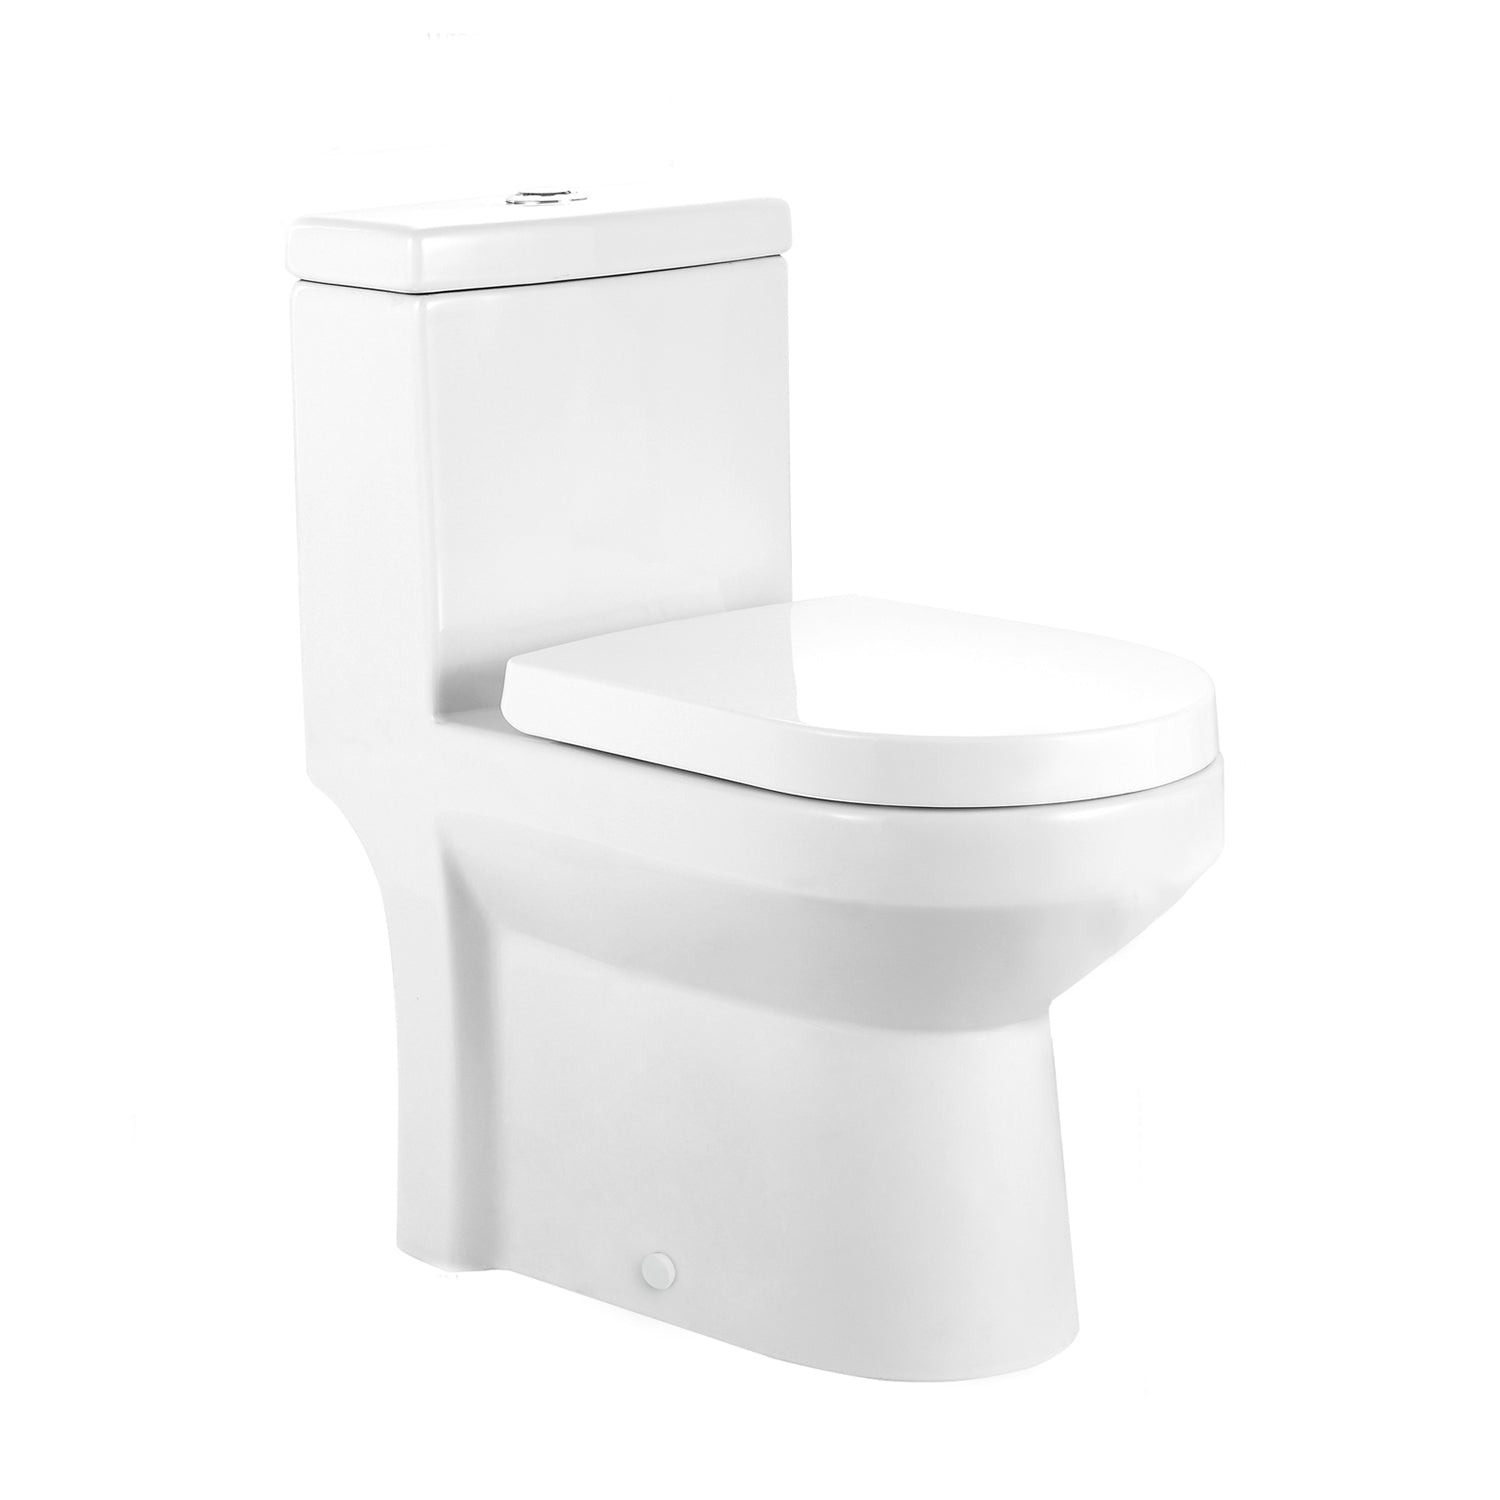 DeerValley DV-1F52813 Compact Dual-Flush Toi – DeerValley